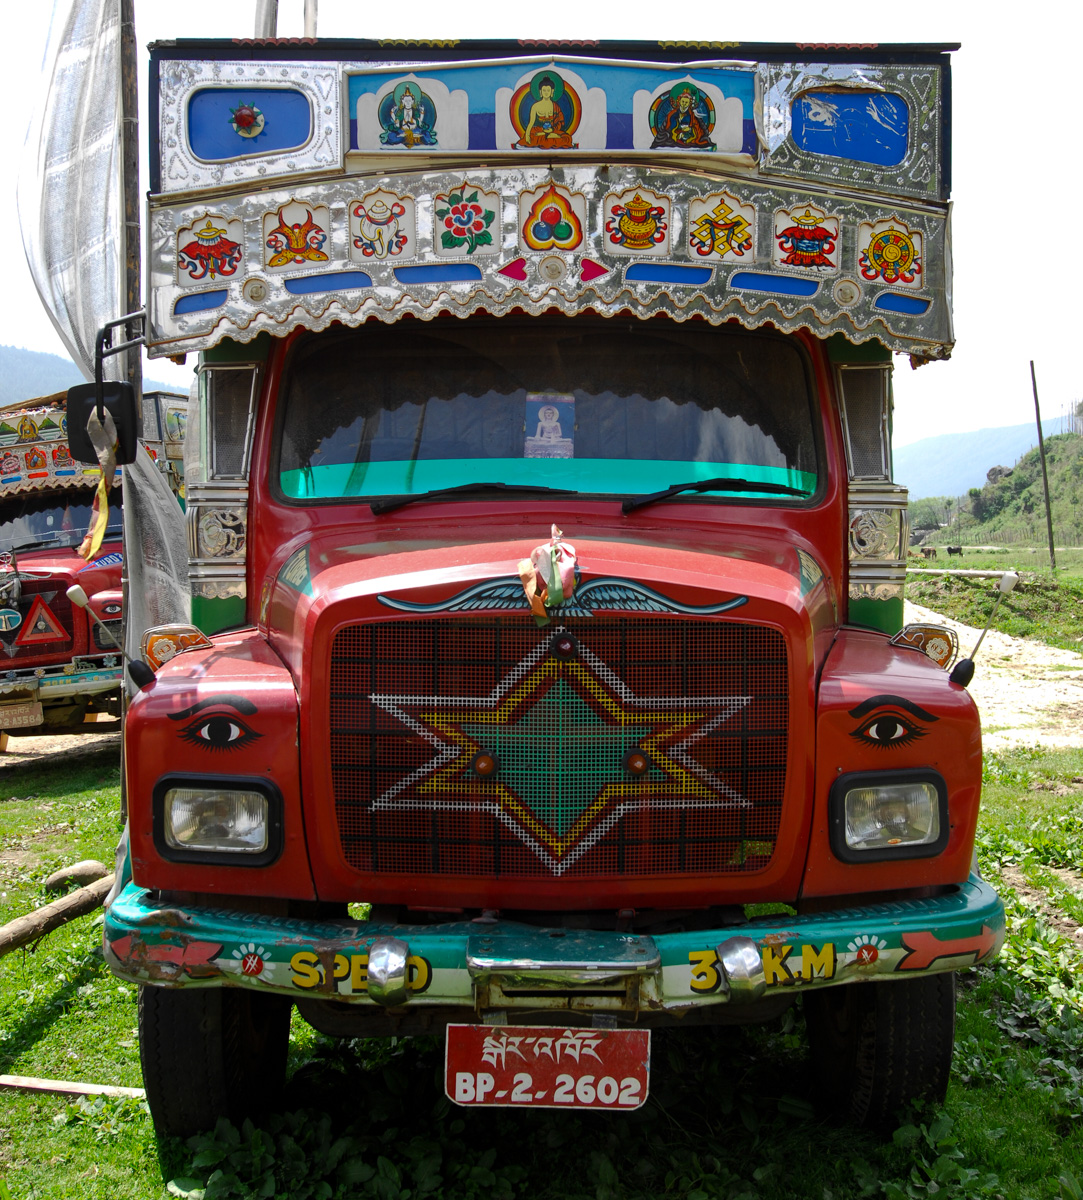 Decorated truck from Bhutan